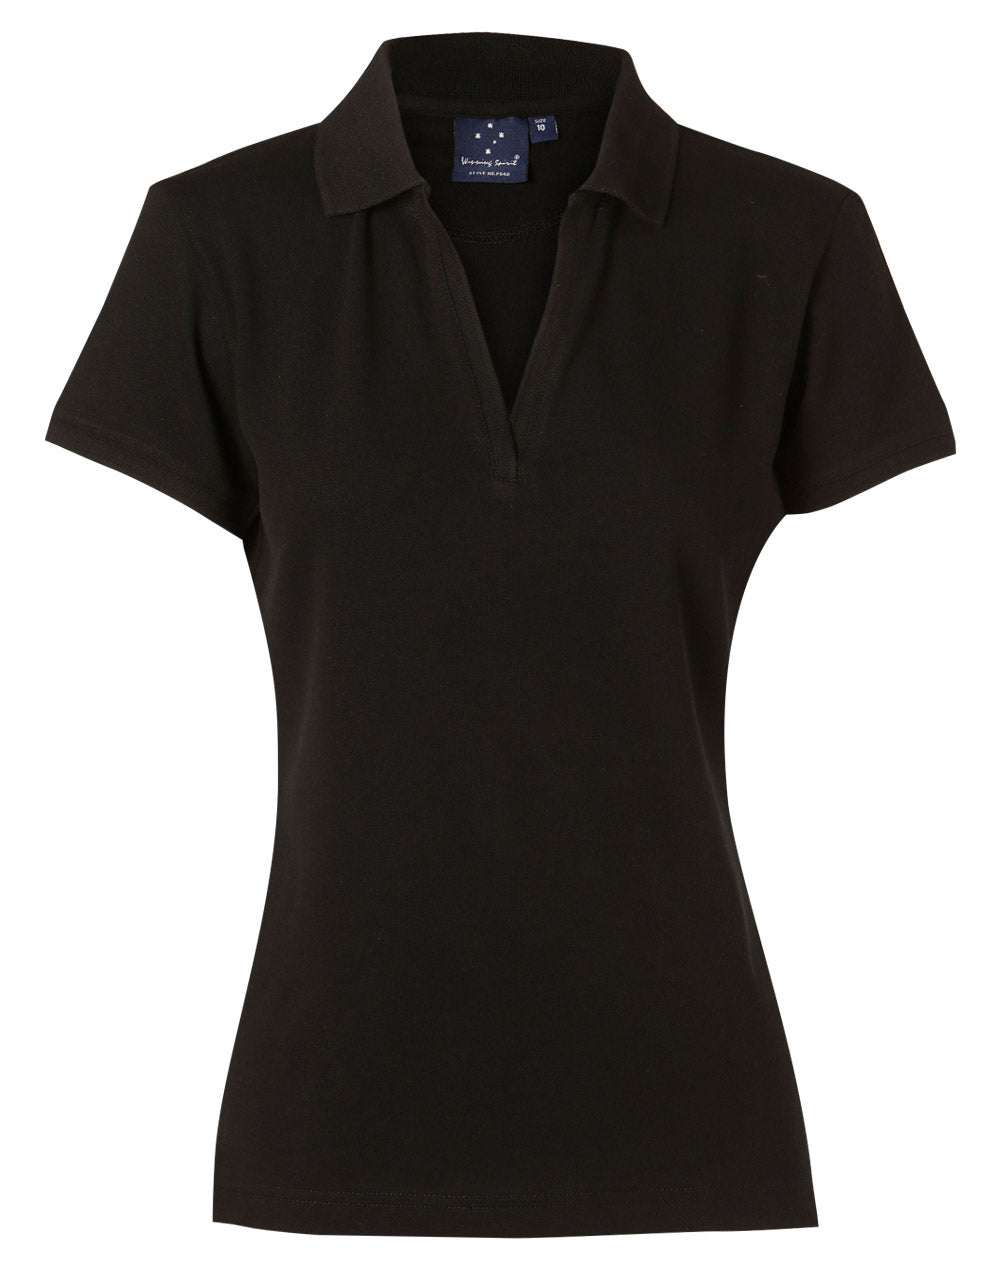 Ladies Cotton/elastine Polo - made by AIW